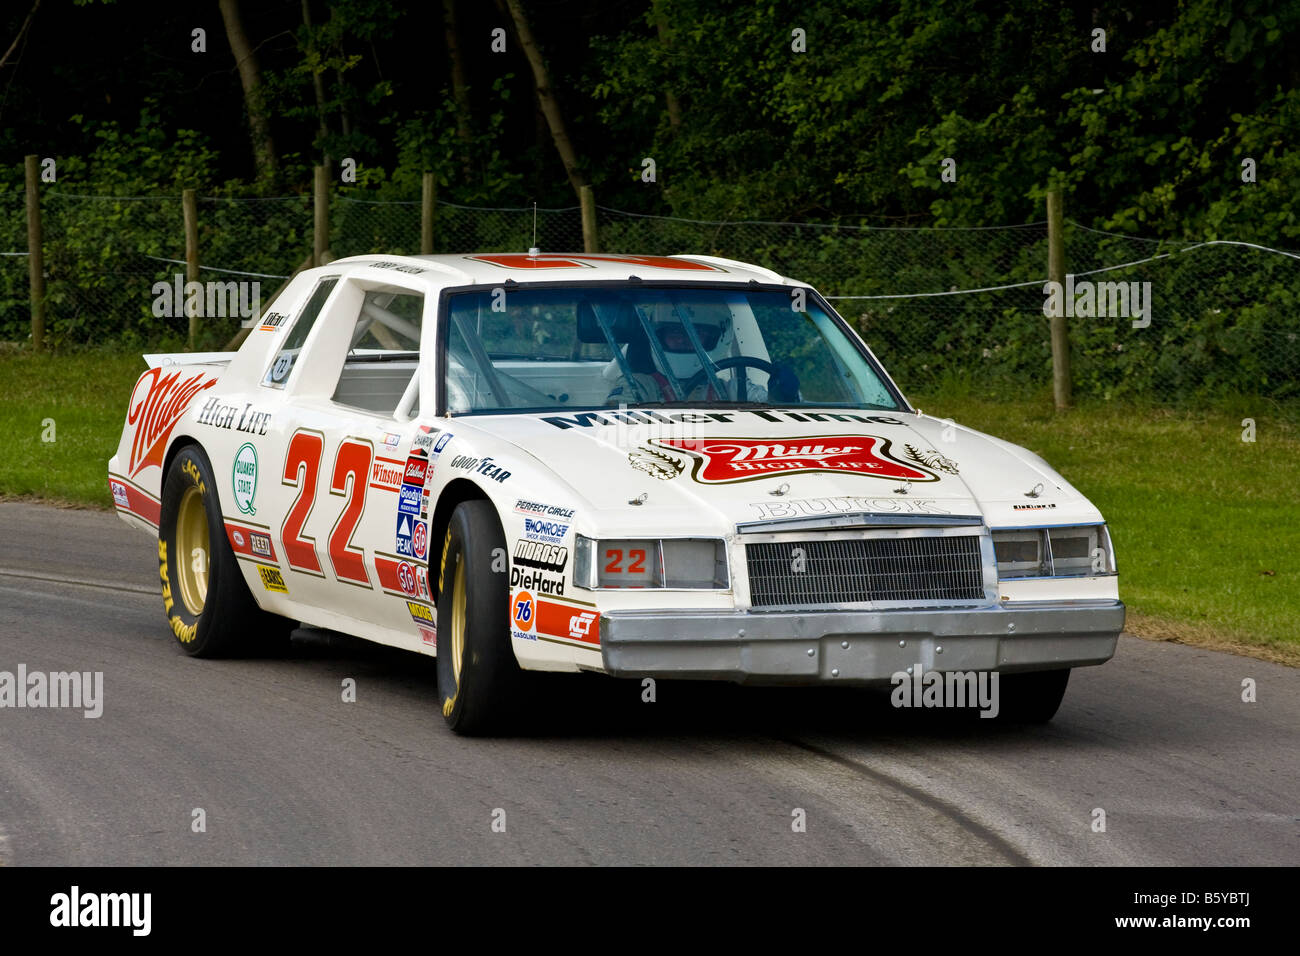 1983 Buick Regal NASCAR racer at Goodwood Festival of Speed, Sussex, UK. Stock Photo